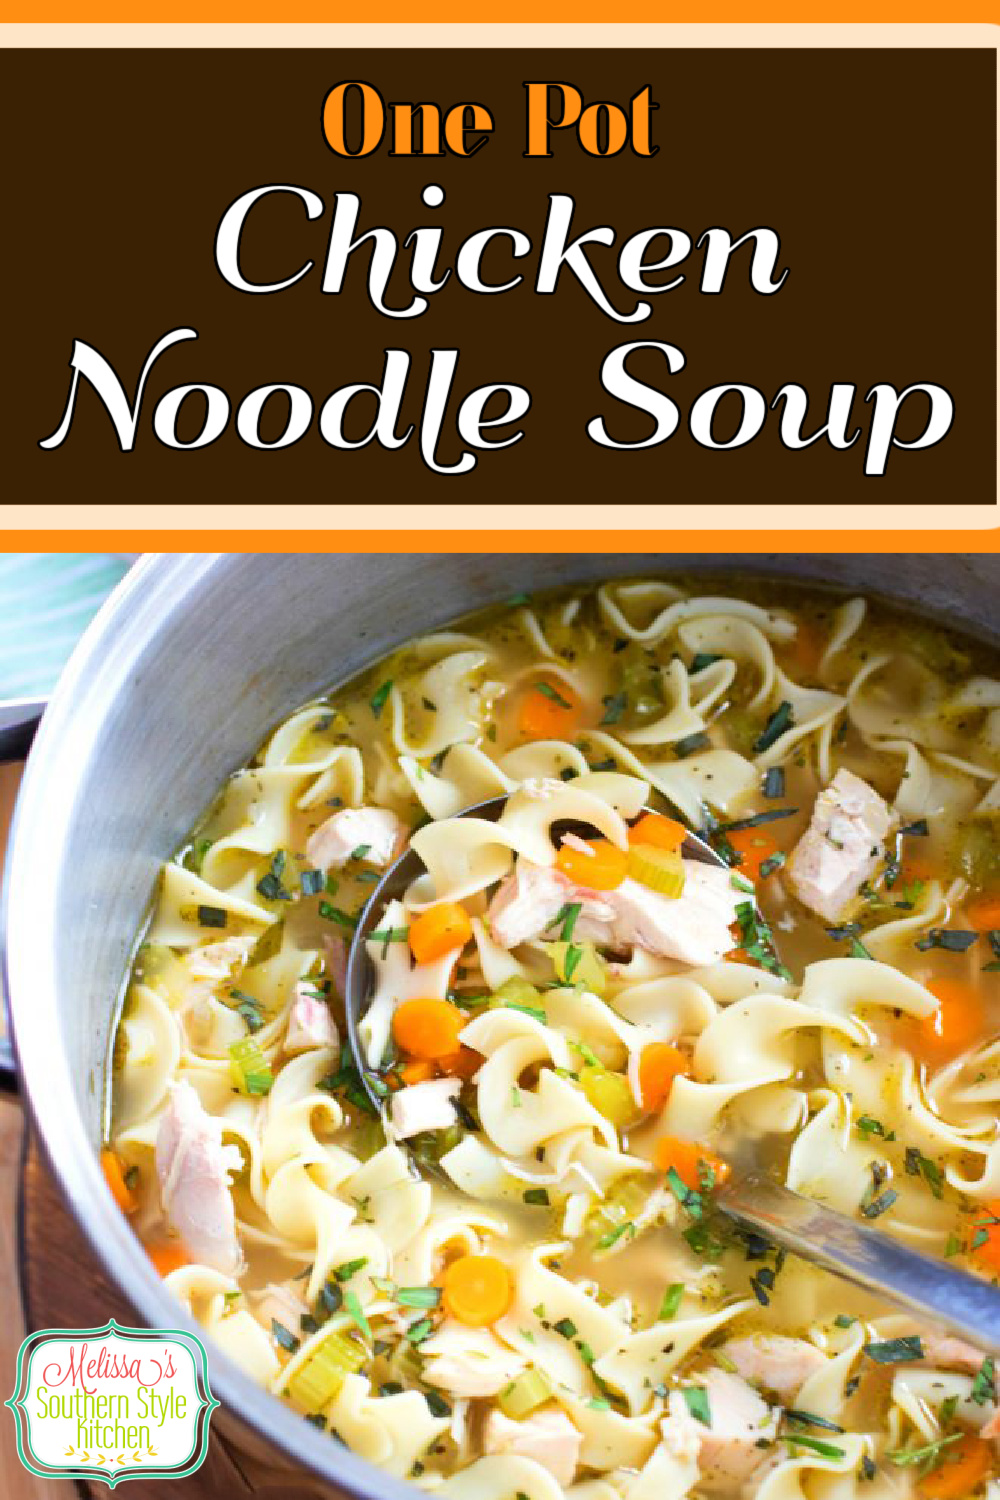 This homemade One Pot Chicken Noodle Soup will cure what ails you #chickennoodlesoup #chickenrecipes #easychickenrecipes #bestchickennoodlesoup #souprecipes #chickensoup #dinner #southernrecipes #easydinnerrecipes #onepotrecipes #eggnoodles